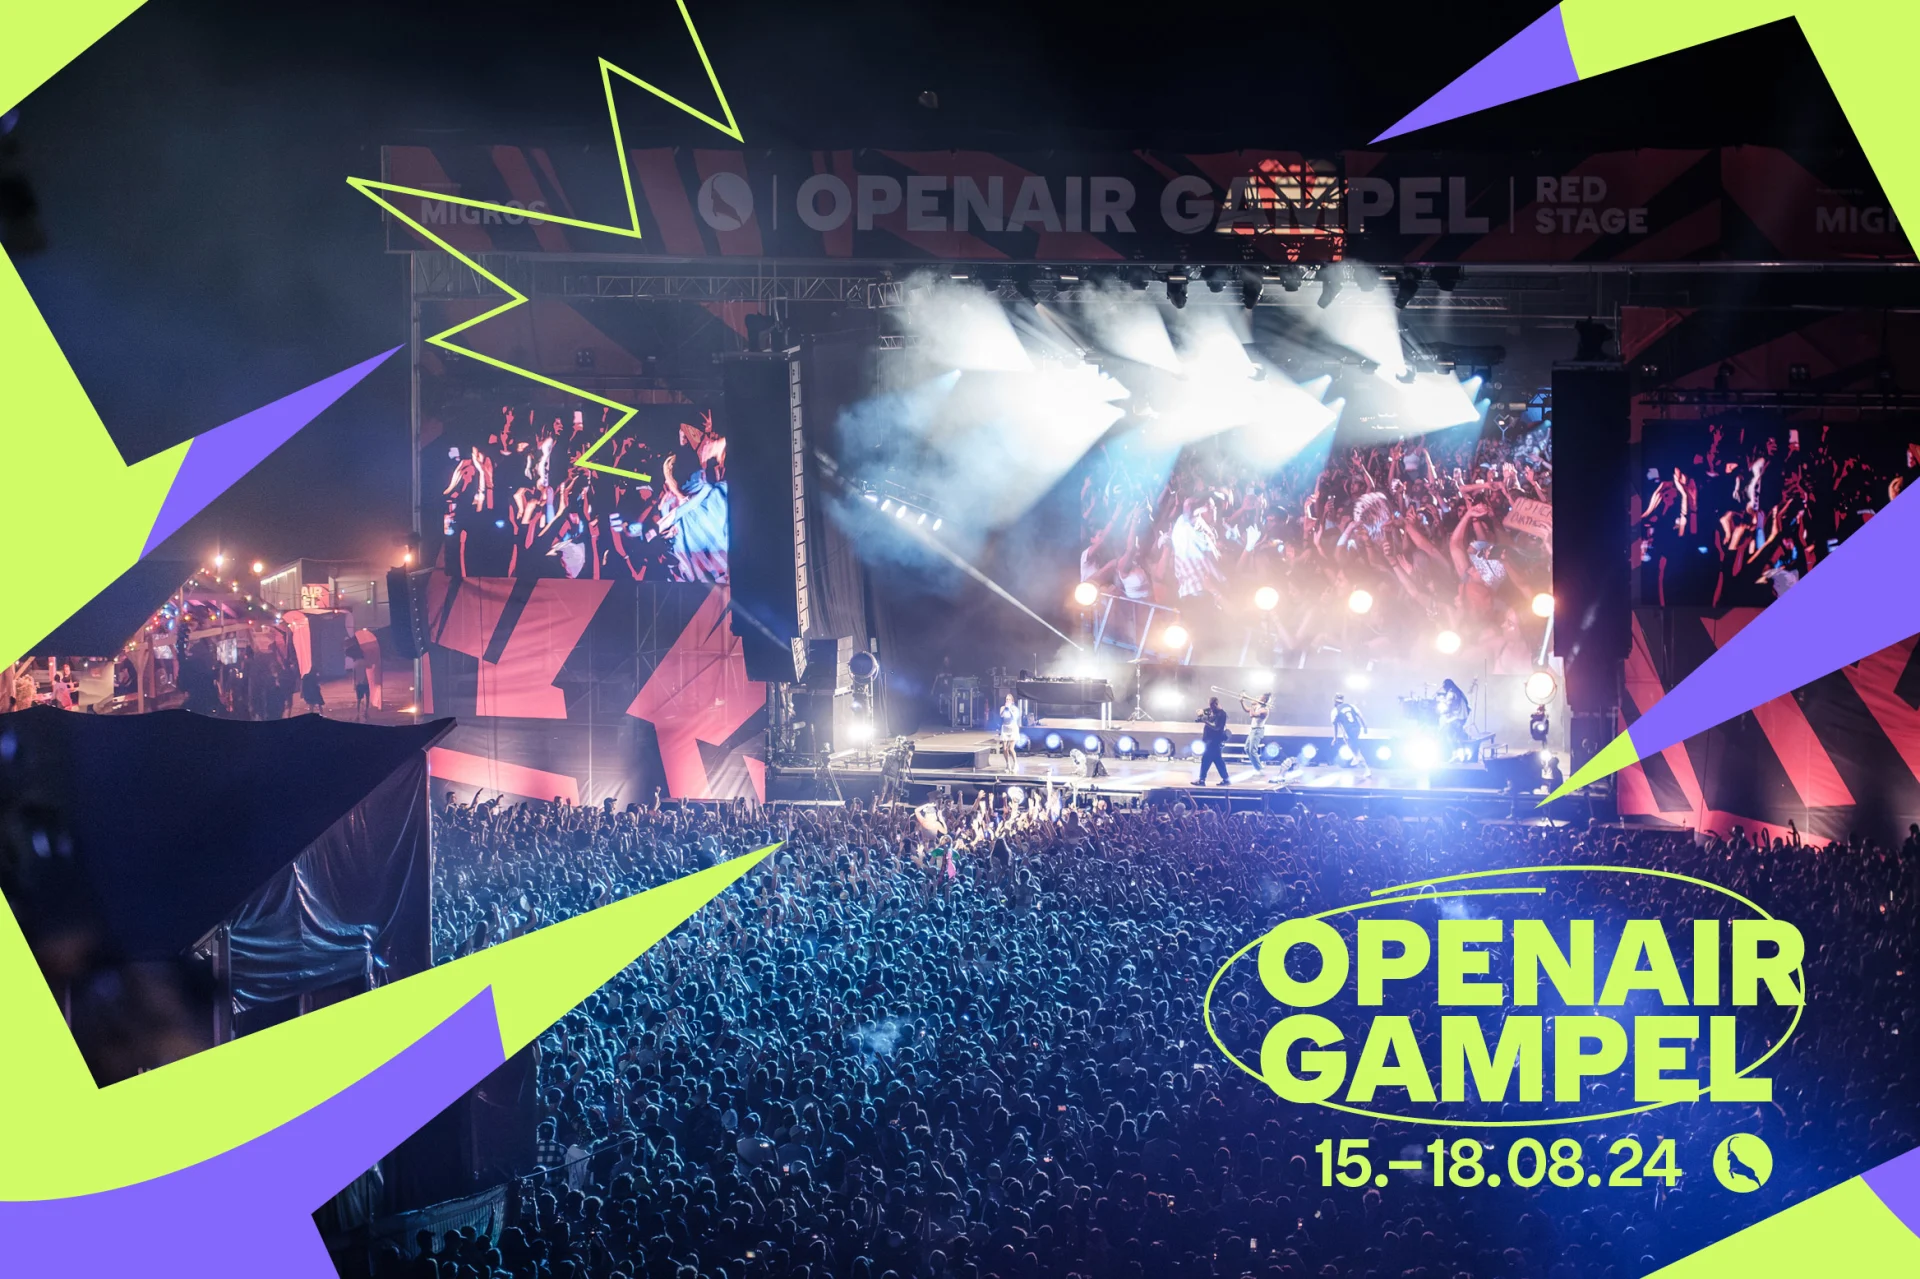 Logo of the Openair Gampel and festival atmosphere in front of the concert stage